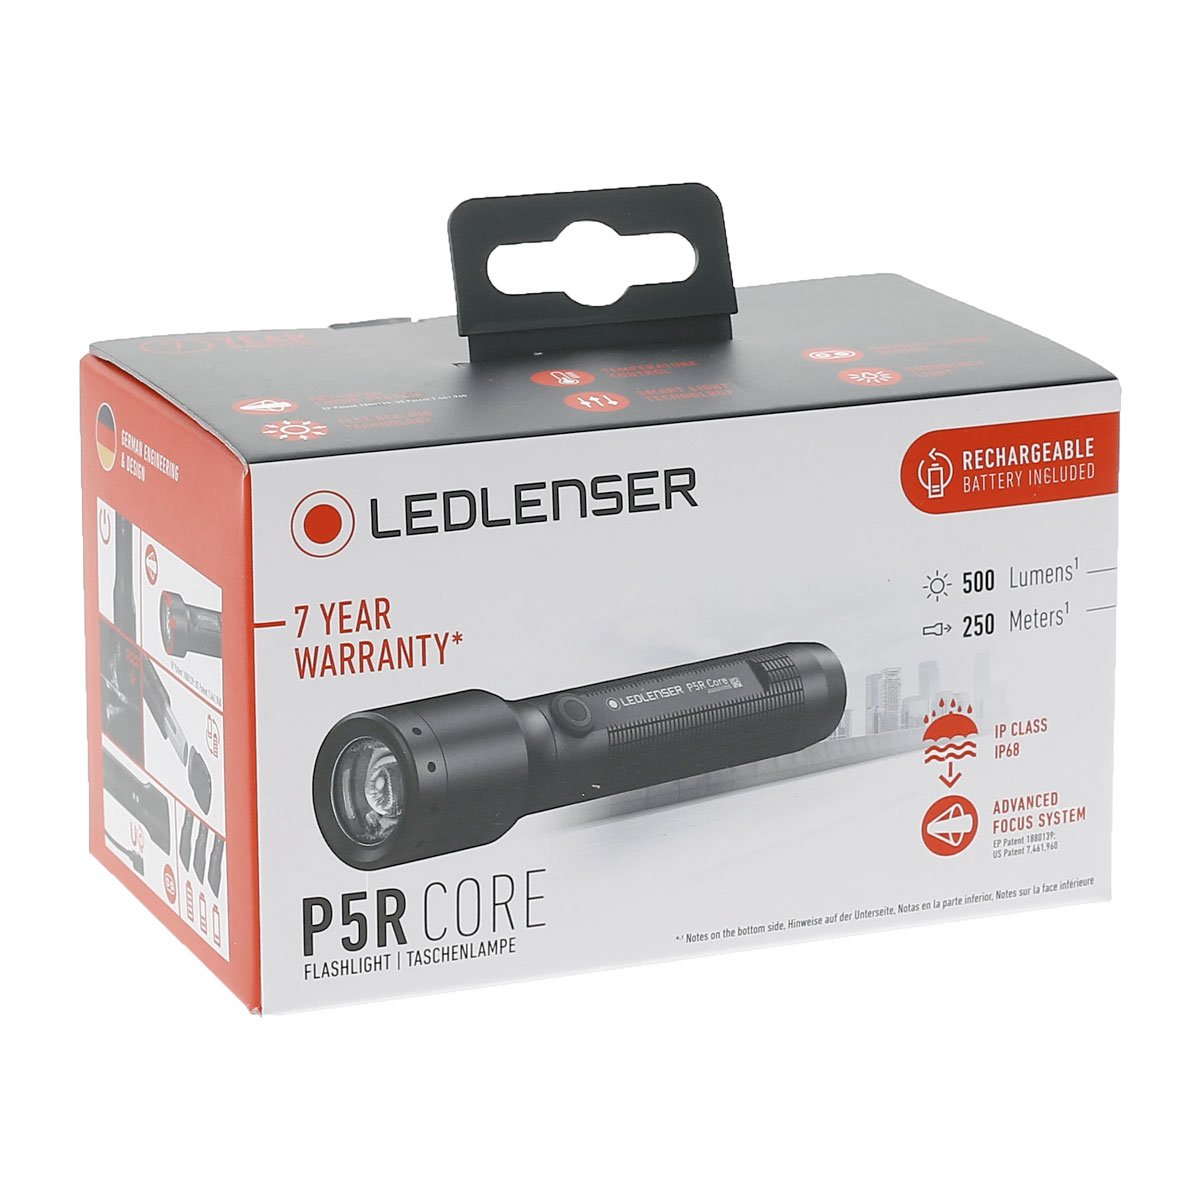 Ledlenser P7R Tactical Police Security Rechargeable Torch Flashlight Tactical Gear